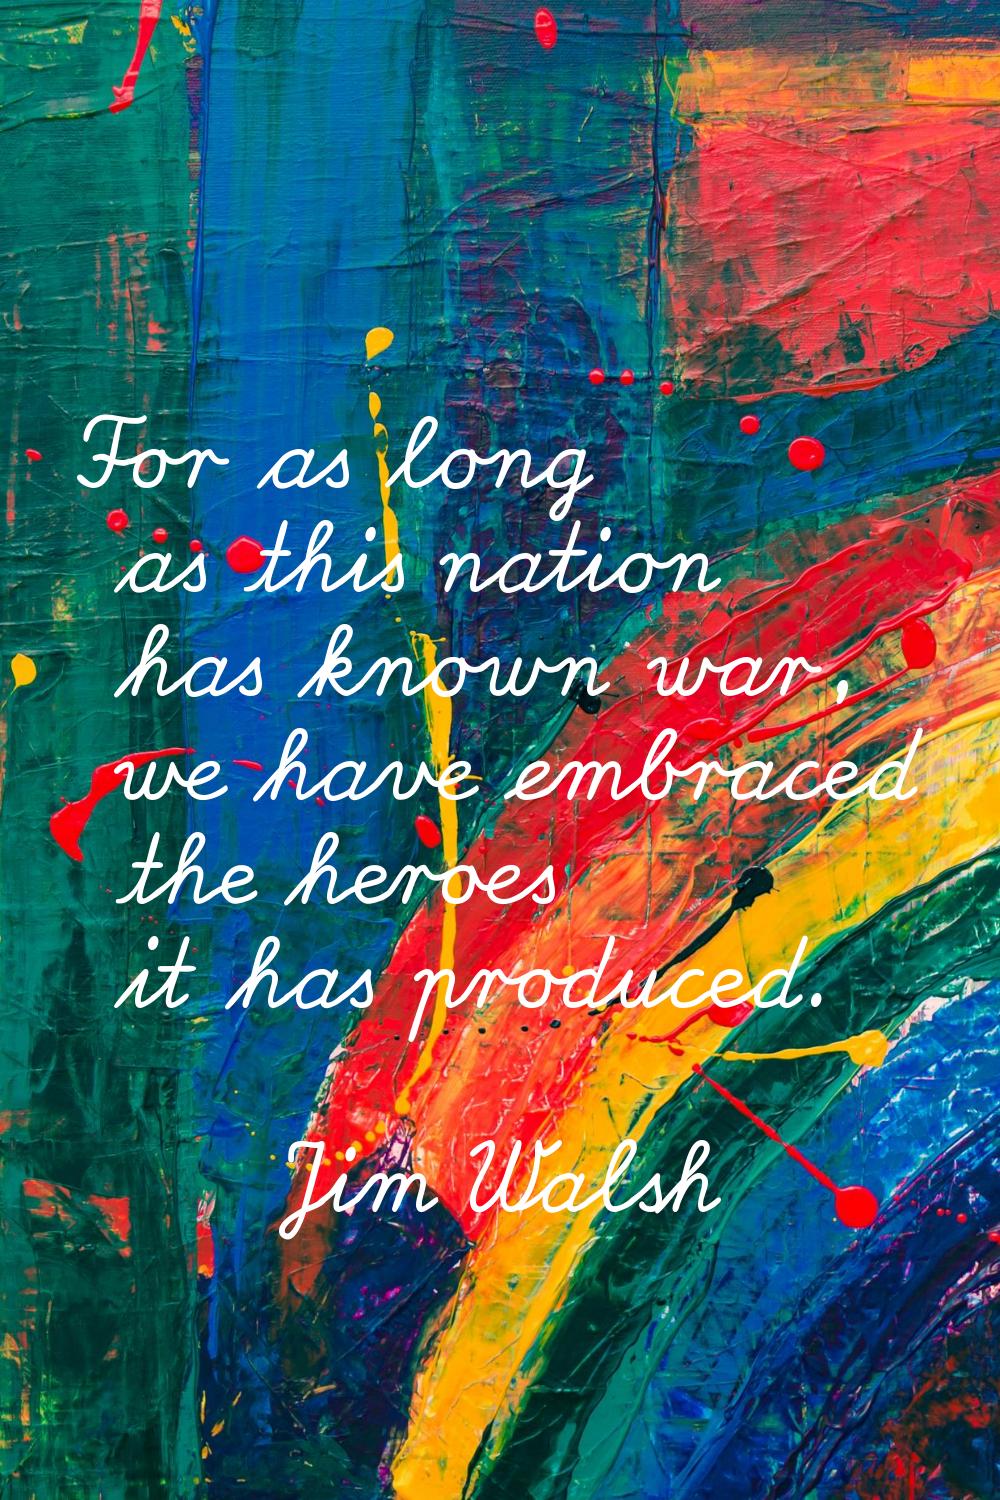 For as long as this nation has known war, we have embraced the heroes it has produced.